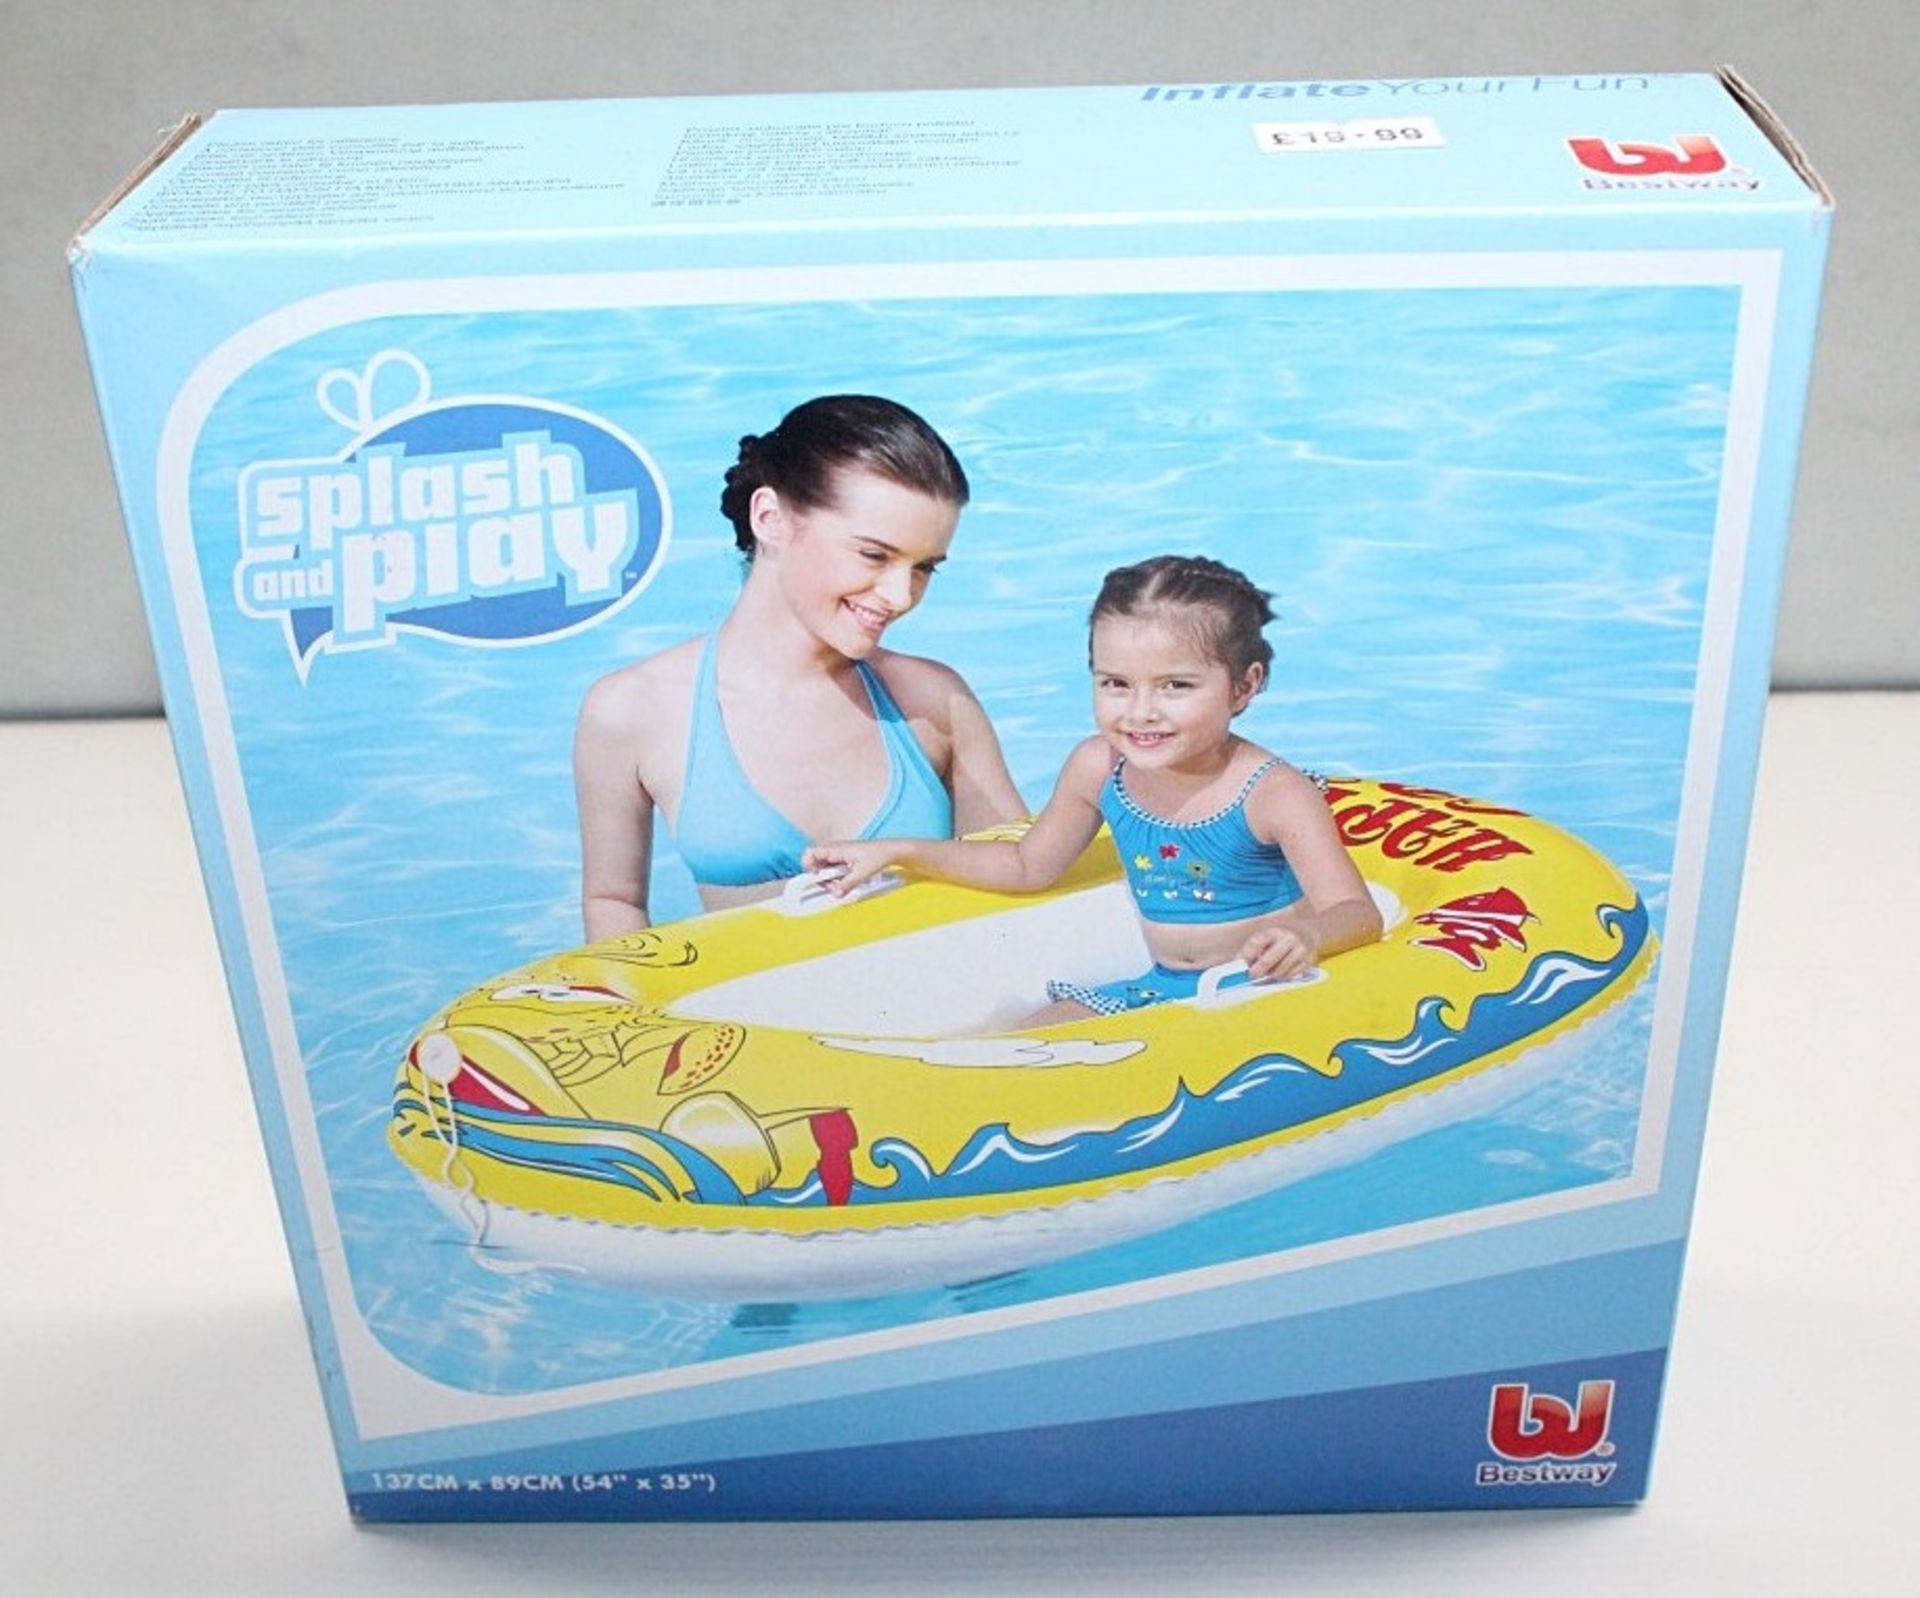 1 x Bestway 54" Inflatable Rubber Dinghy Boat Raft Pool Toy - New & Boxed -  Ref: JIM021A - - Image 2 of 3